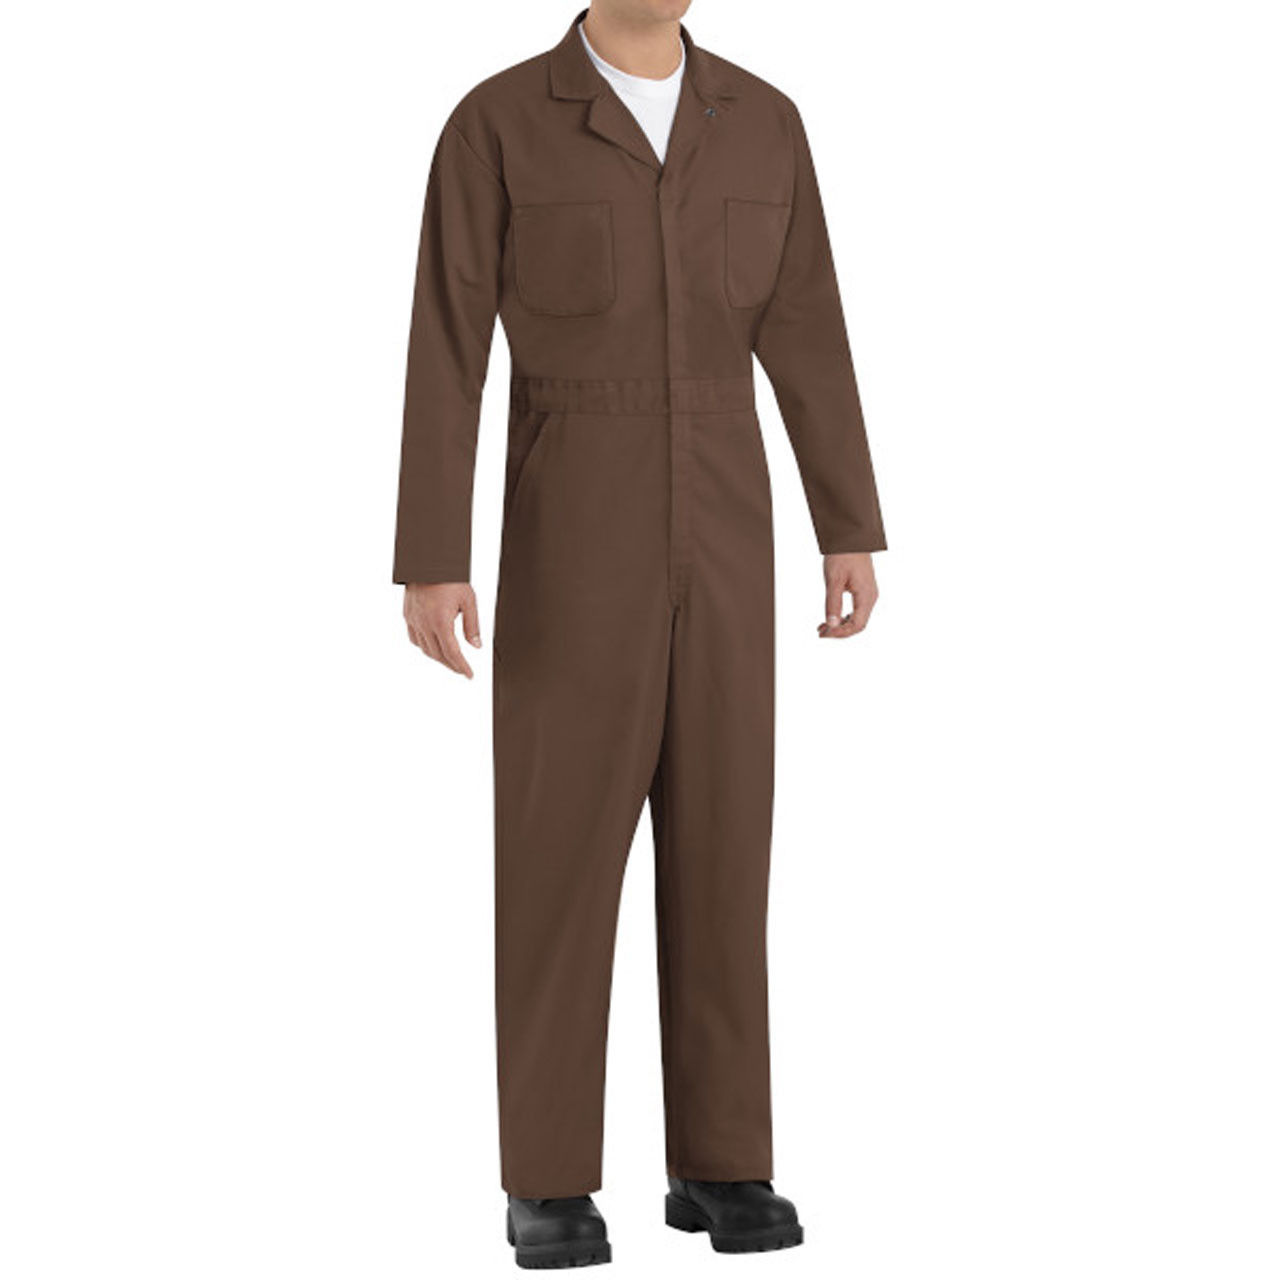 Is the fabric weight of the brown coveralls heavy?